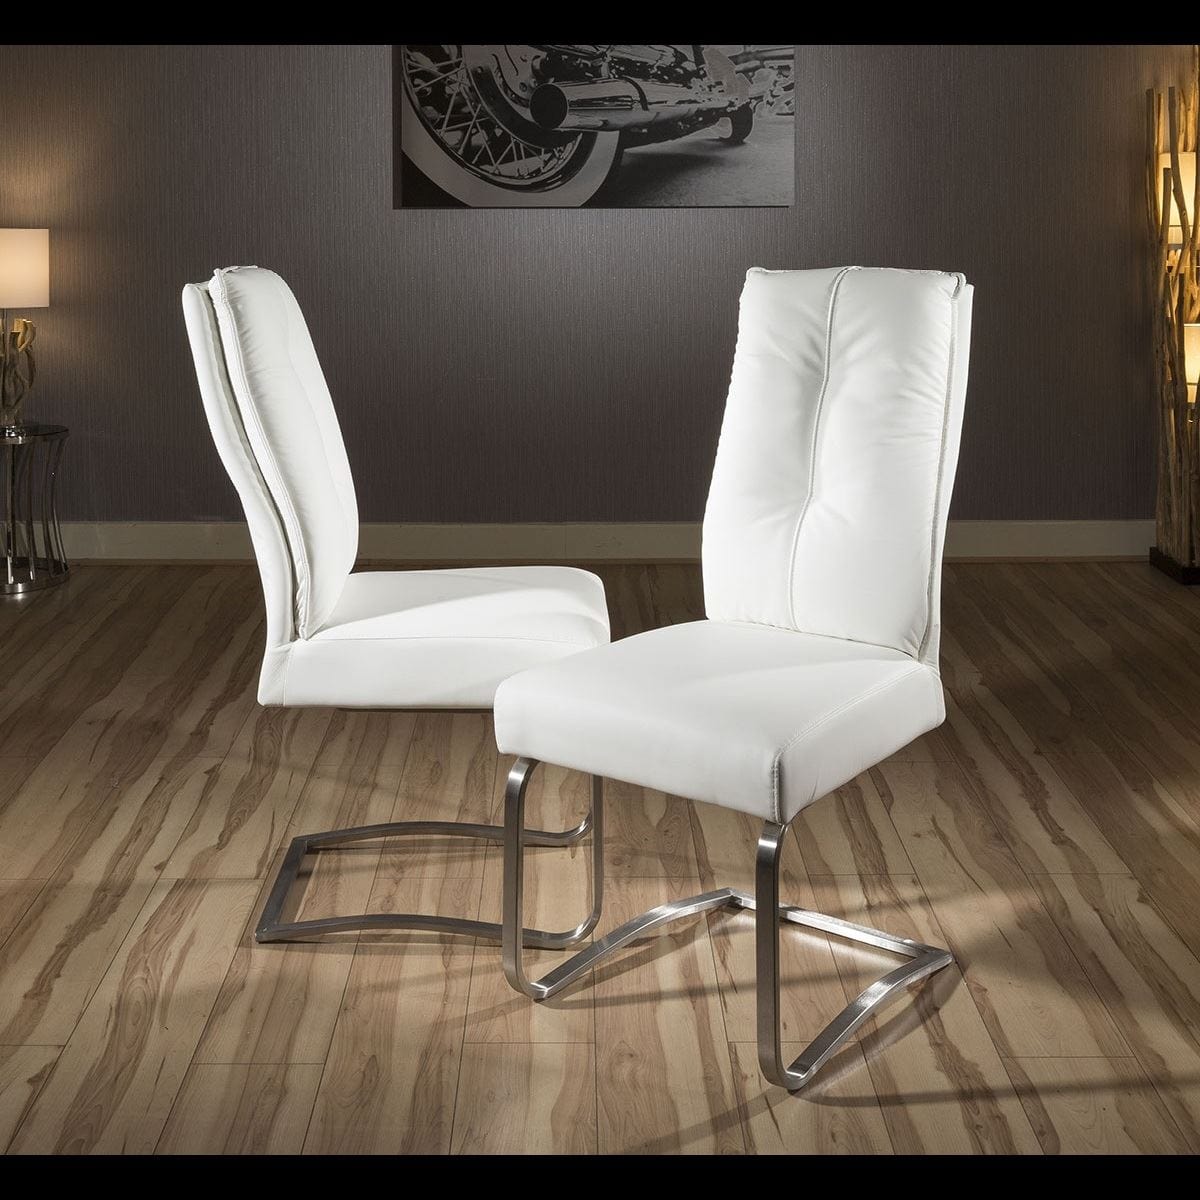 Quatropi 2 White Leather Cantilever Dining Chairs